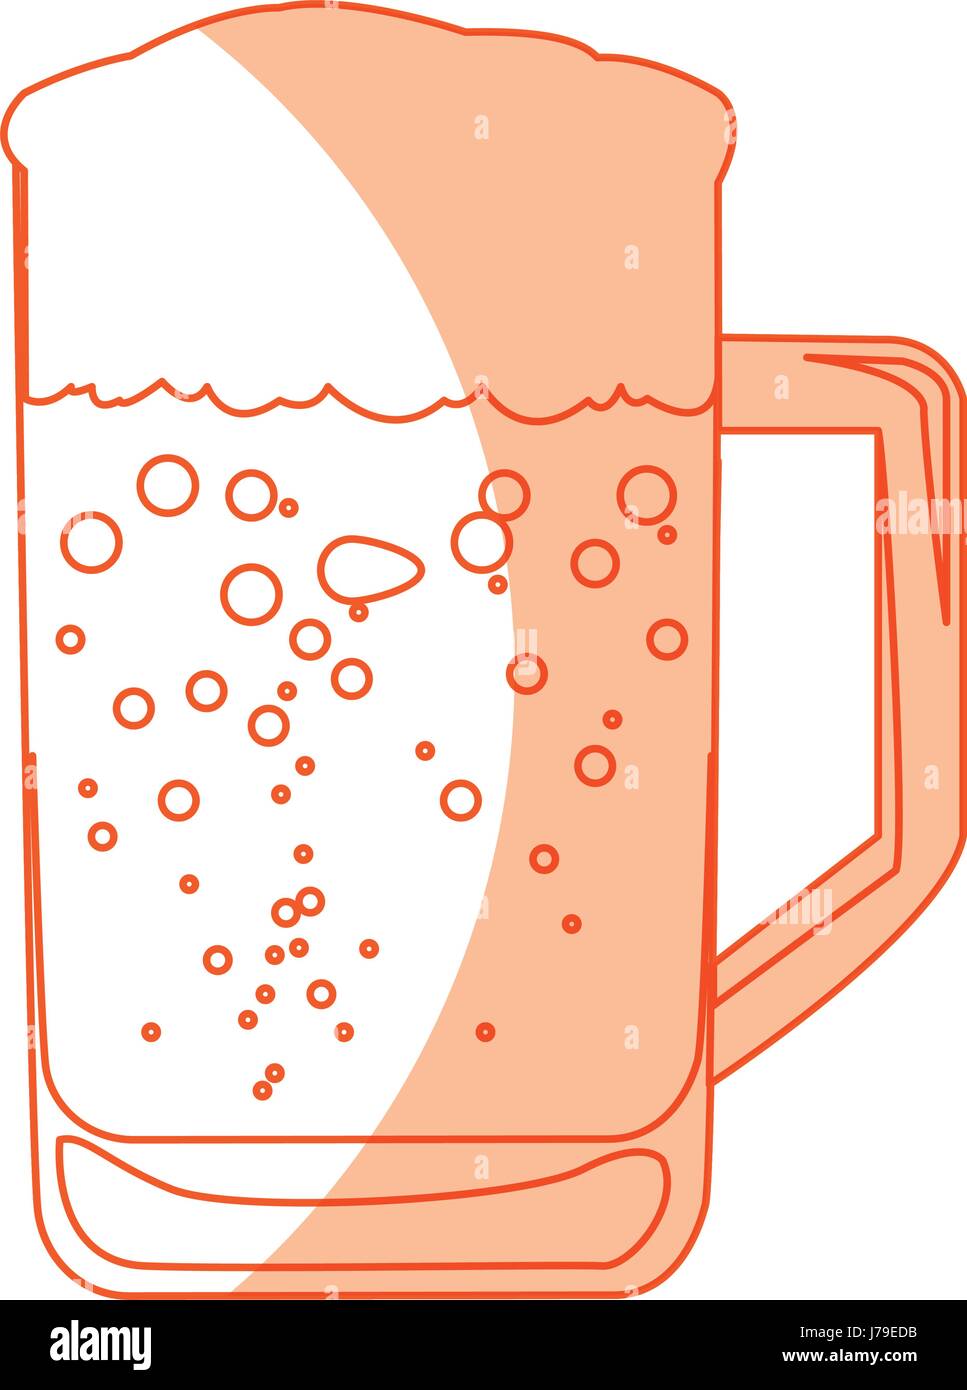 big glass of lager beer from bavaria and munich oktoberfest Stock Vector